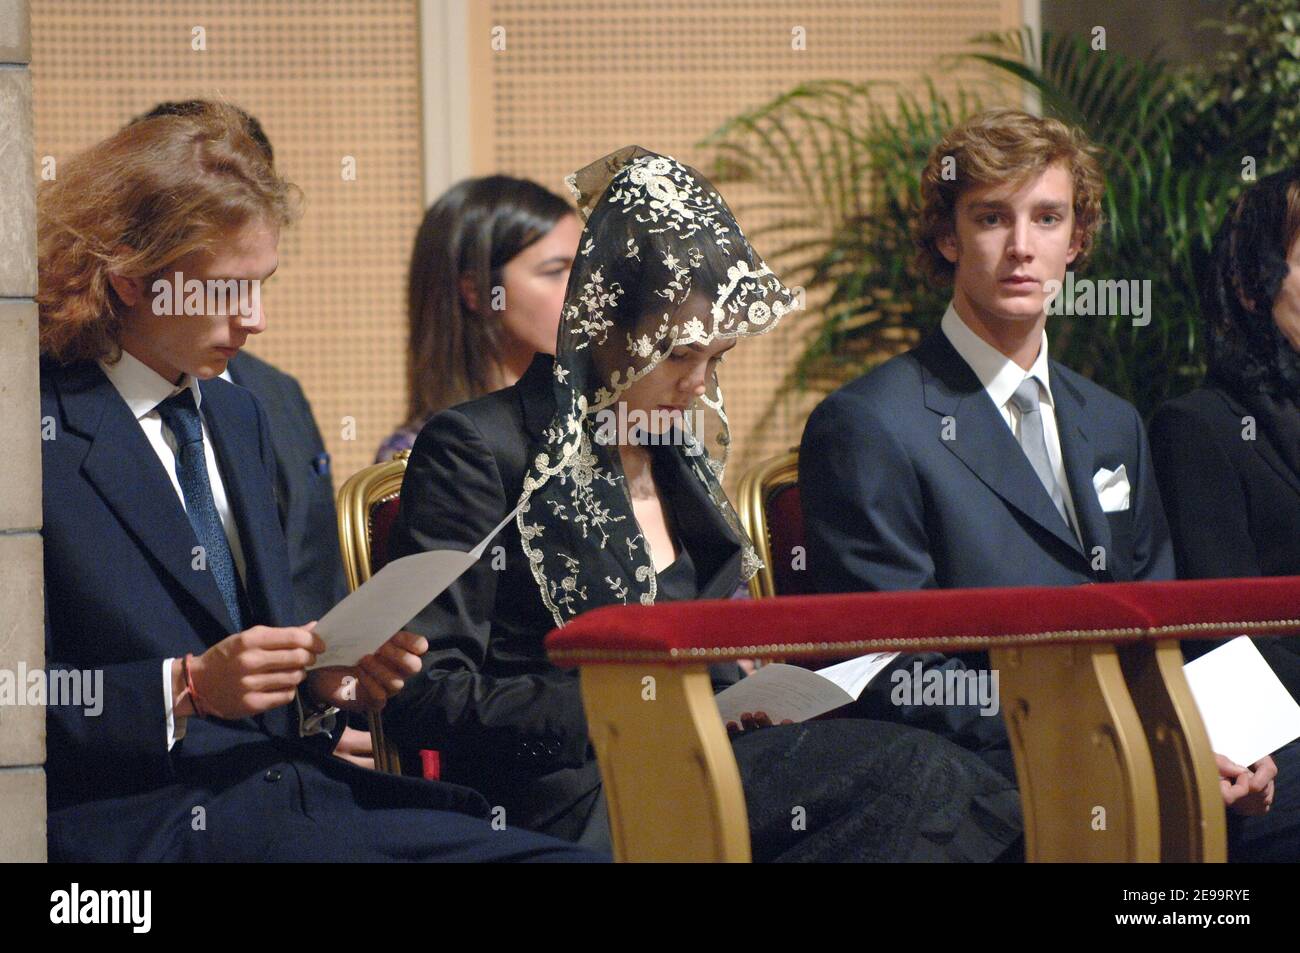 Andrea, Charlotte and Pierre Casiraghi Andrea, Charlotte, Pierre Casiraghi attend the mass commemorating the first anniversary of Prince Rainier's death in Saint-Nicolas Cathedral, in Monaco on April 6, 2006. Prince Rainier III died on April 6, 2005 after a serious illness, and his only son Prince Albert, succeeded him. Photo by Pool/ABACAPRESS.COM Stock Photo